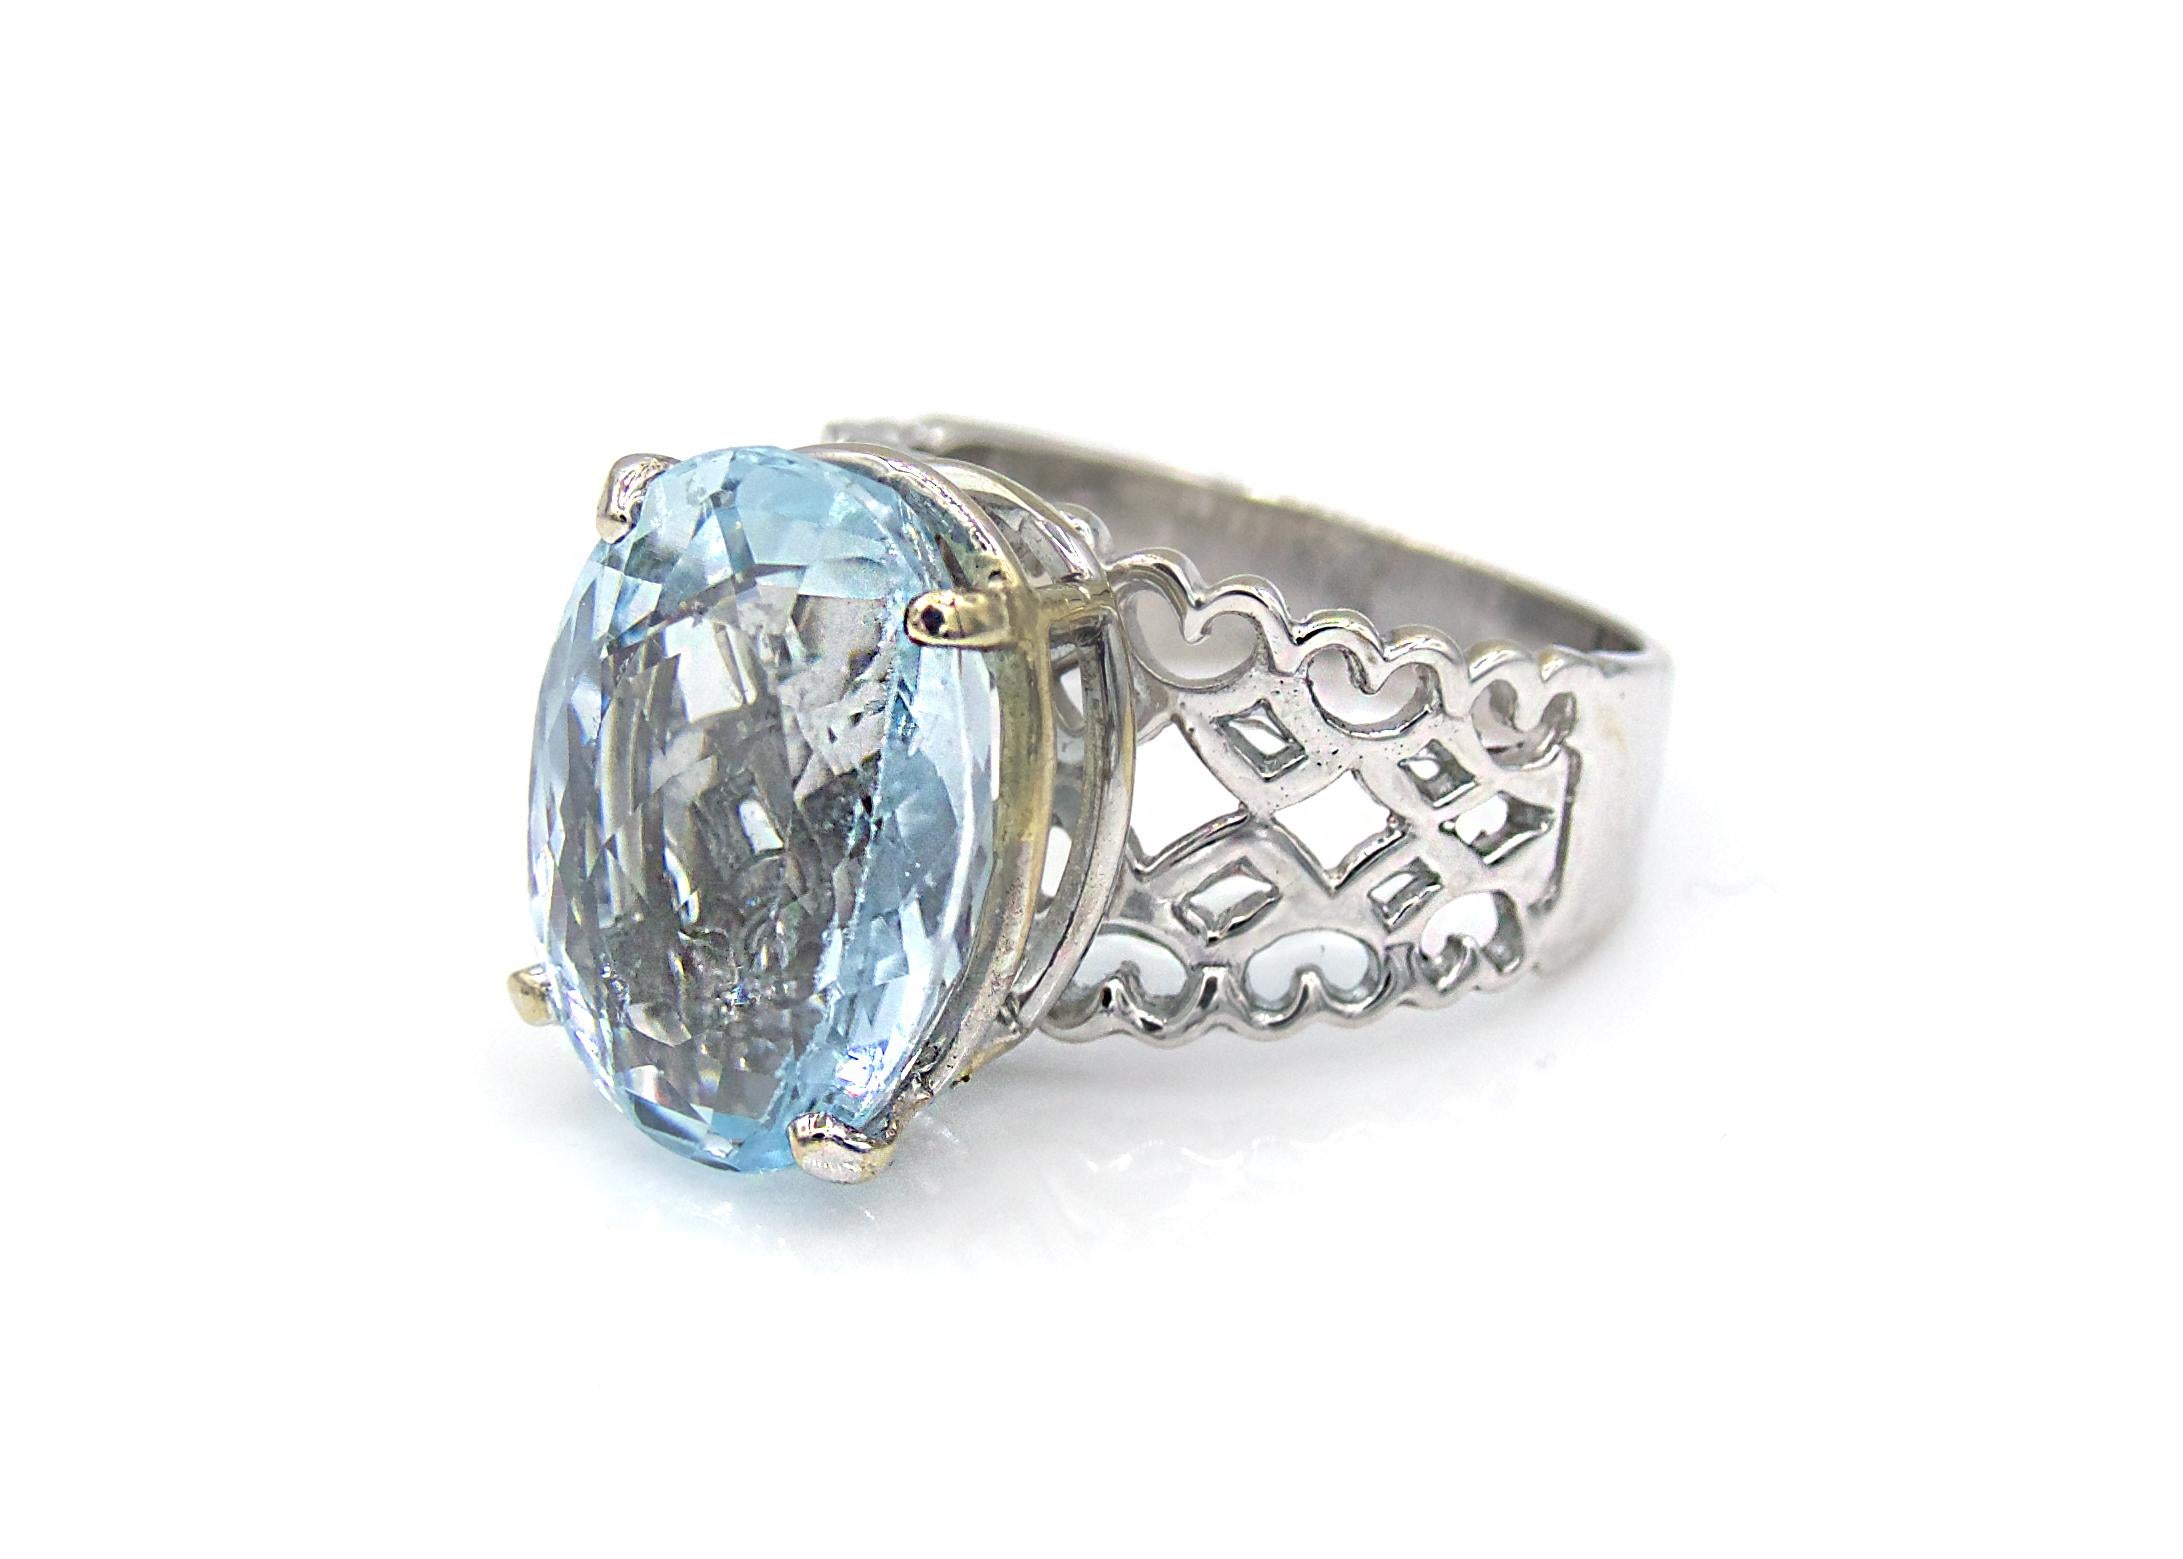 This stylish ring features a beautiful oval-cut light Blue Topaz center stone, weighing in at 8 Carats total. The topaz is high set upon a one-of-a-kind 14K White Gold band that is made with open filigree work in the shape of modern hearts. 

8